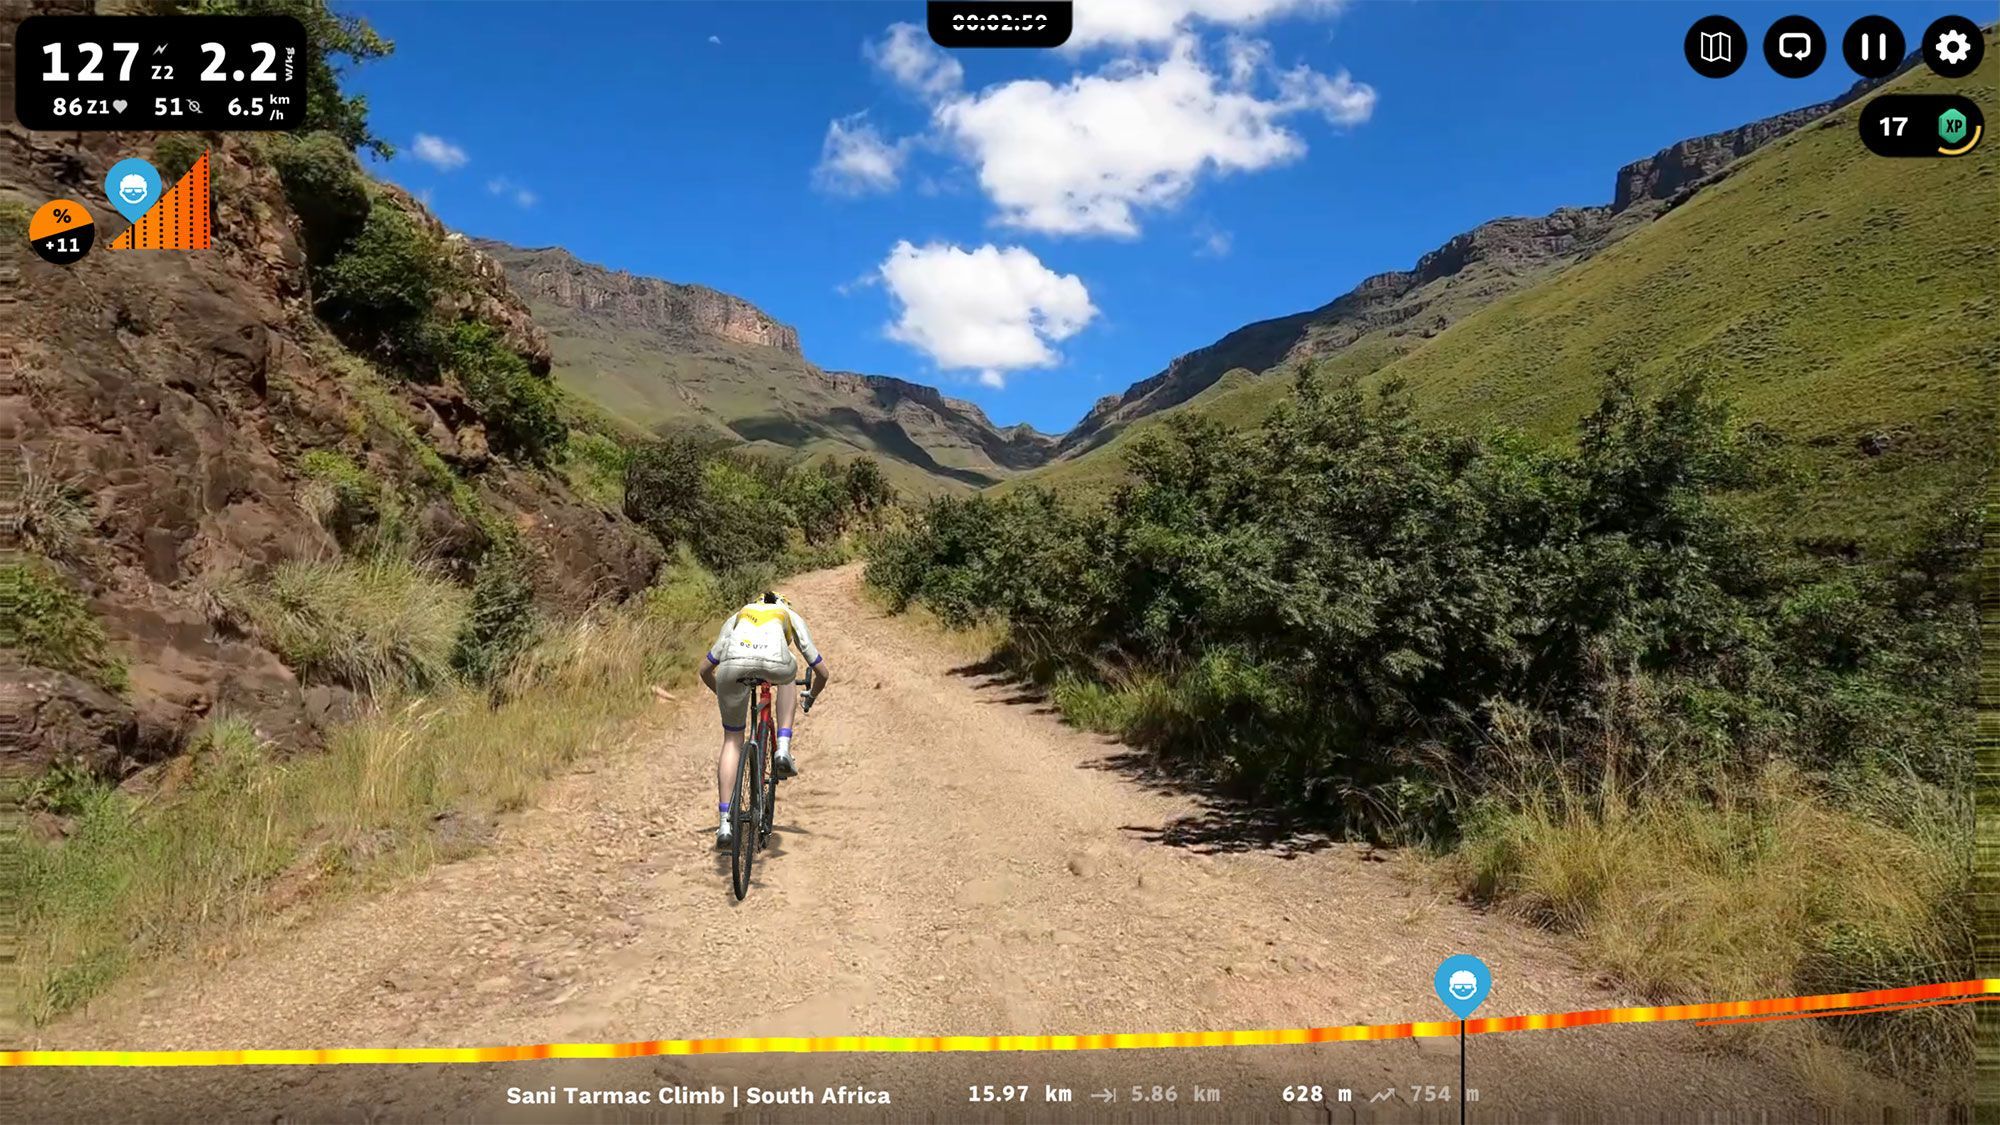 Sani Tarmac Climb in South Africa on Rouvy